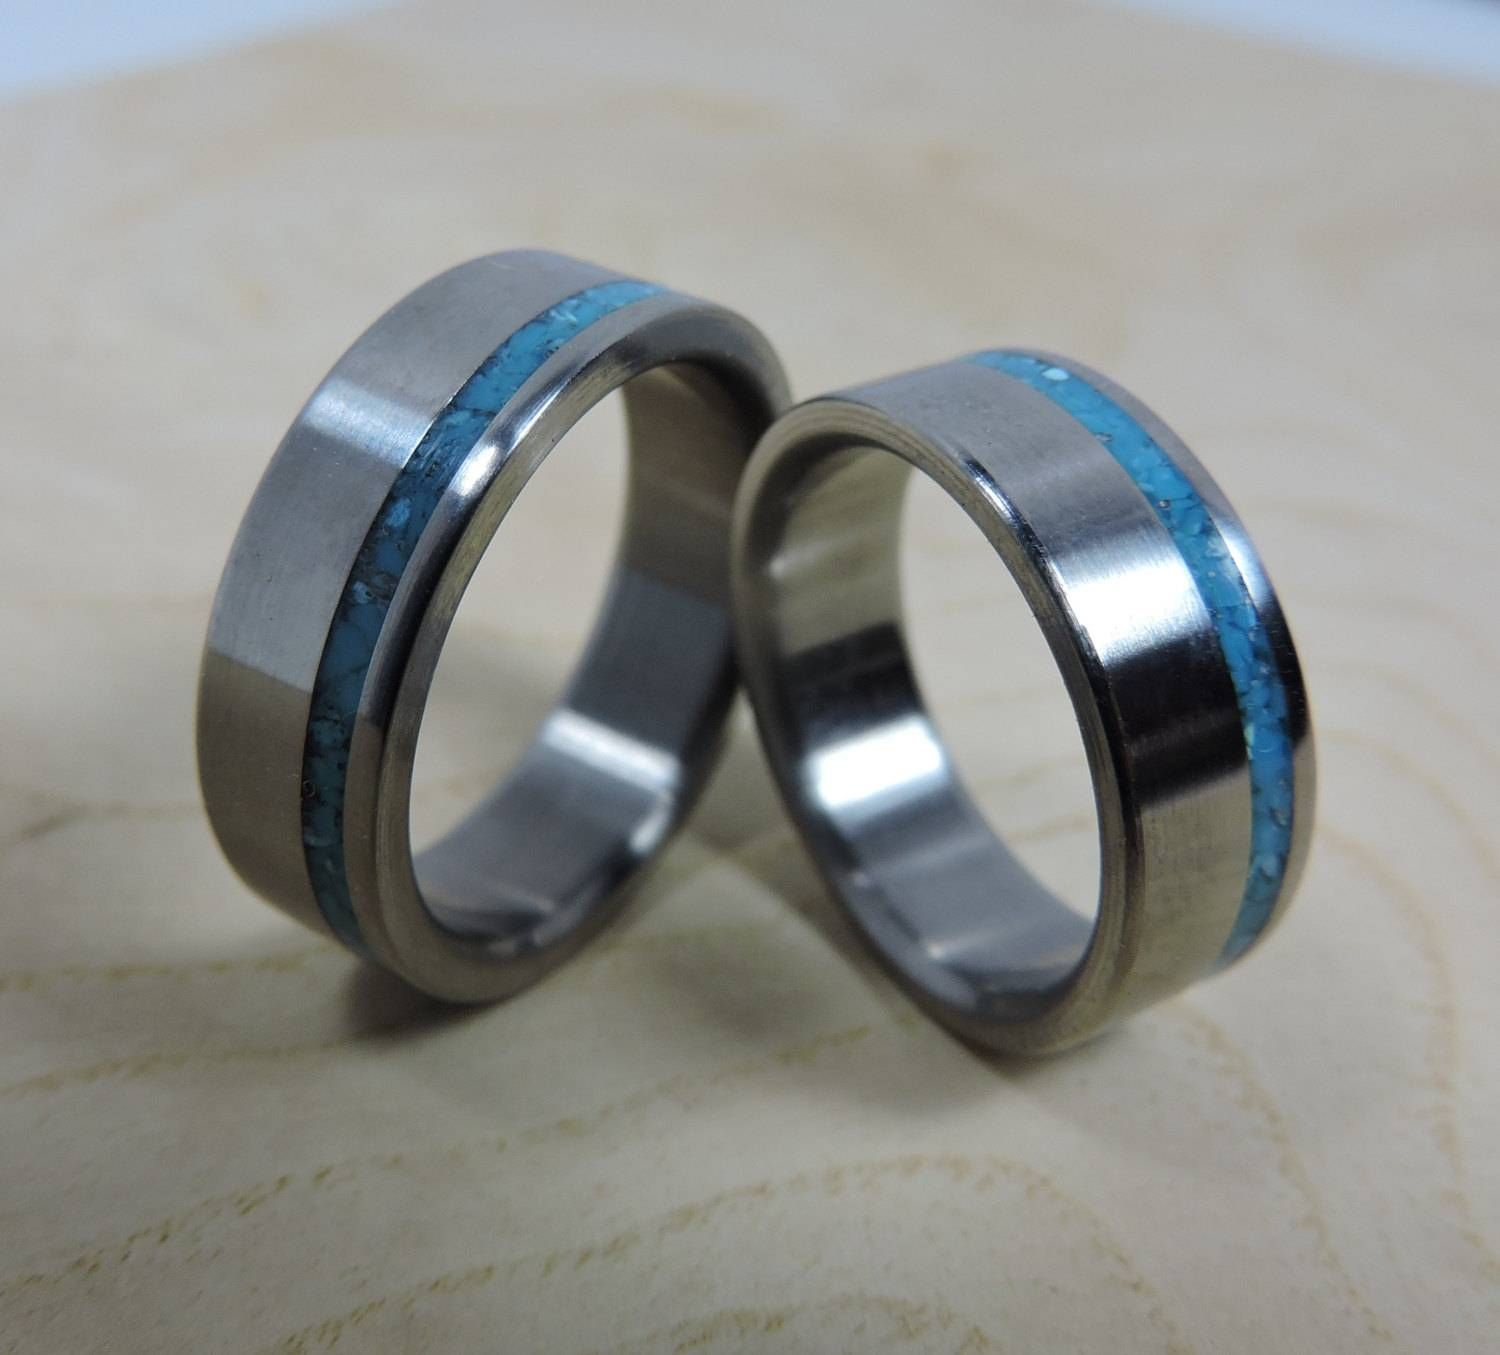 Titanium Rings, Wedding Rings, Turquoise Rings, Wedding Band Set Intended For Titanium Wedding Bands Sets His Hers (View 4 of 15)